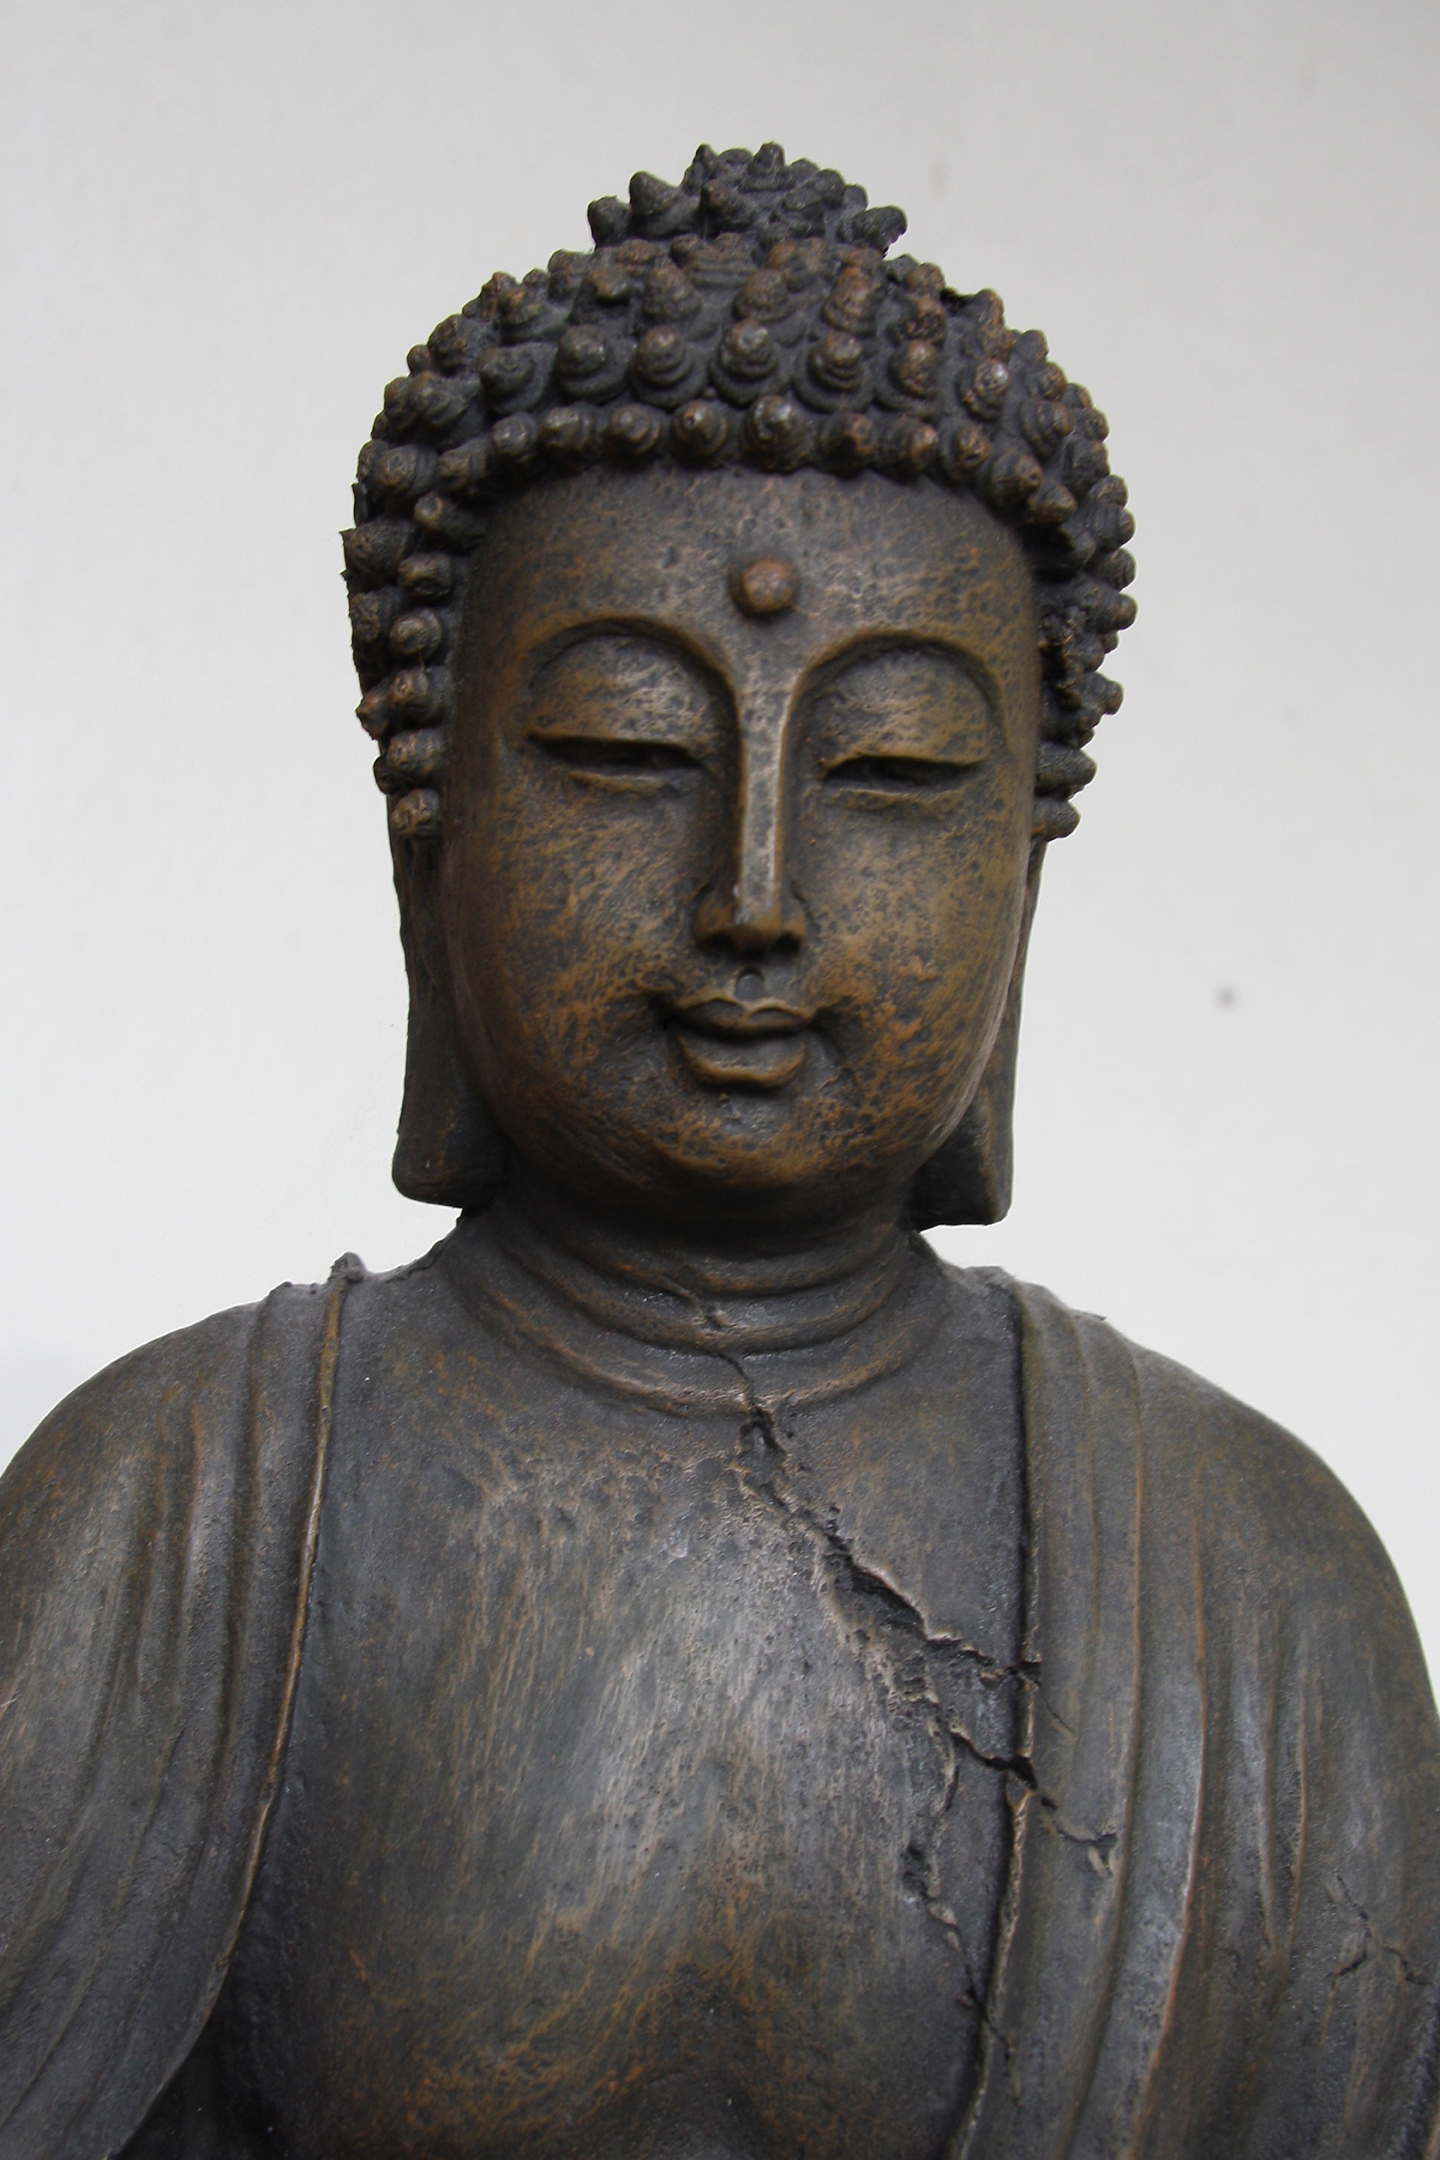 large statue of buddha with eye glasses on head